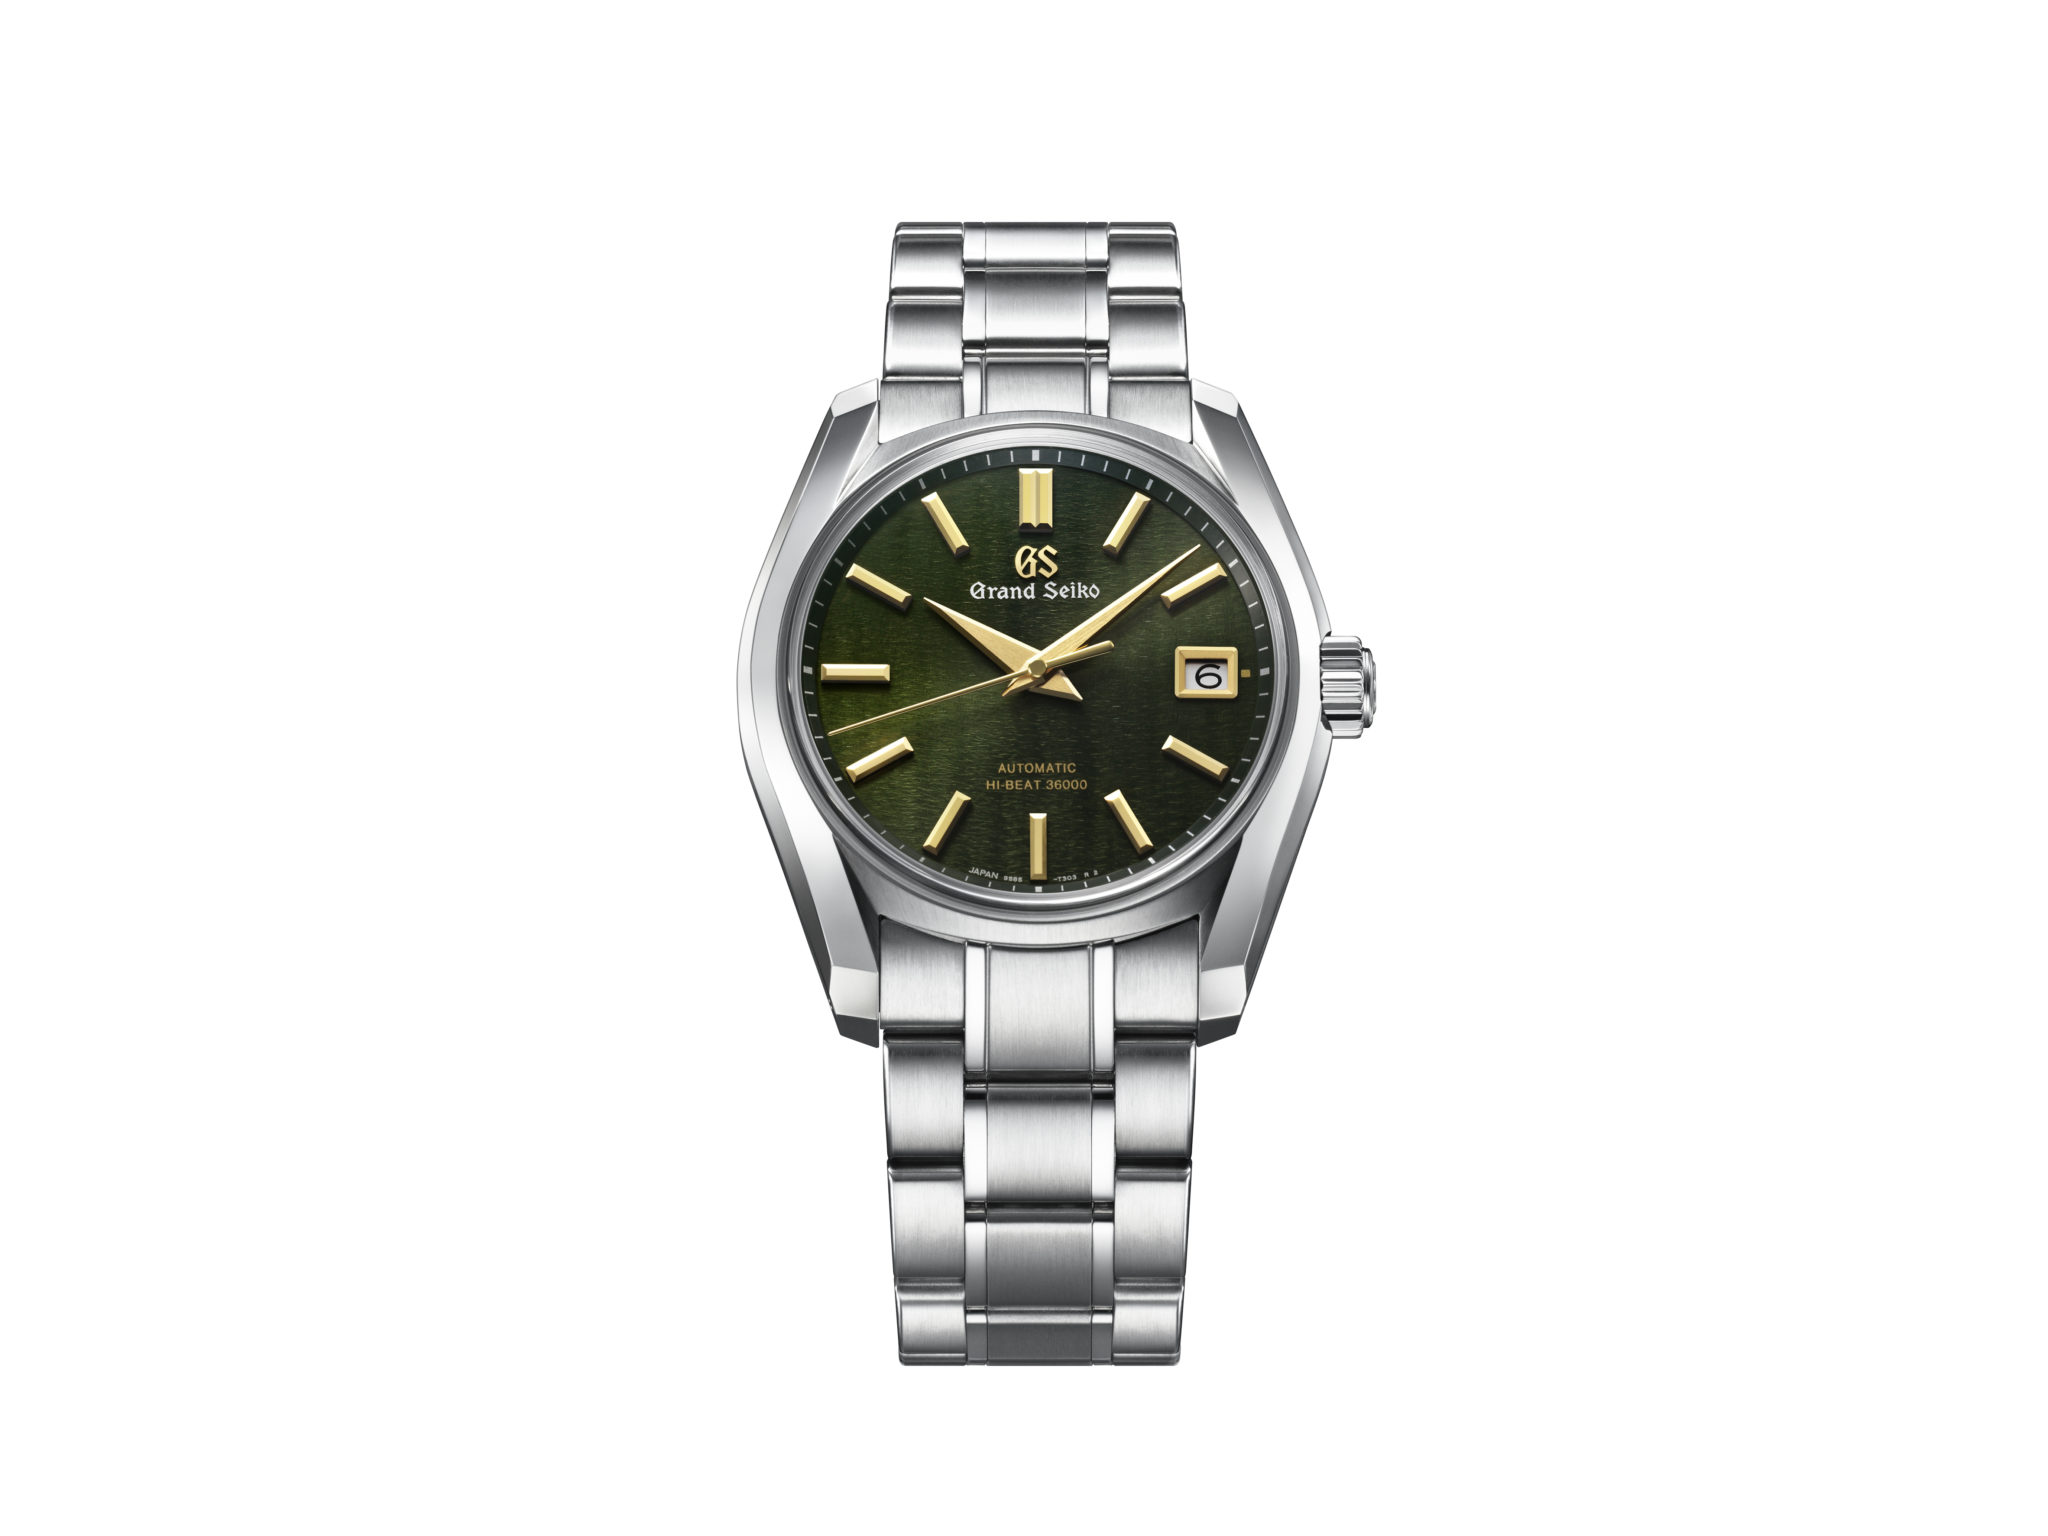 Grand Seiko celebrates 24 seasons of the year with latest Heritage  Collection watches